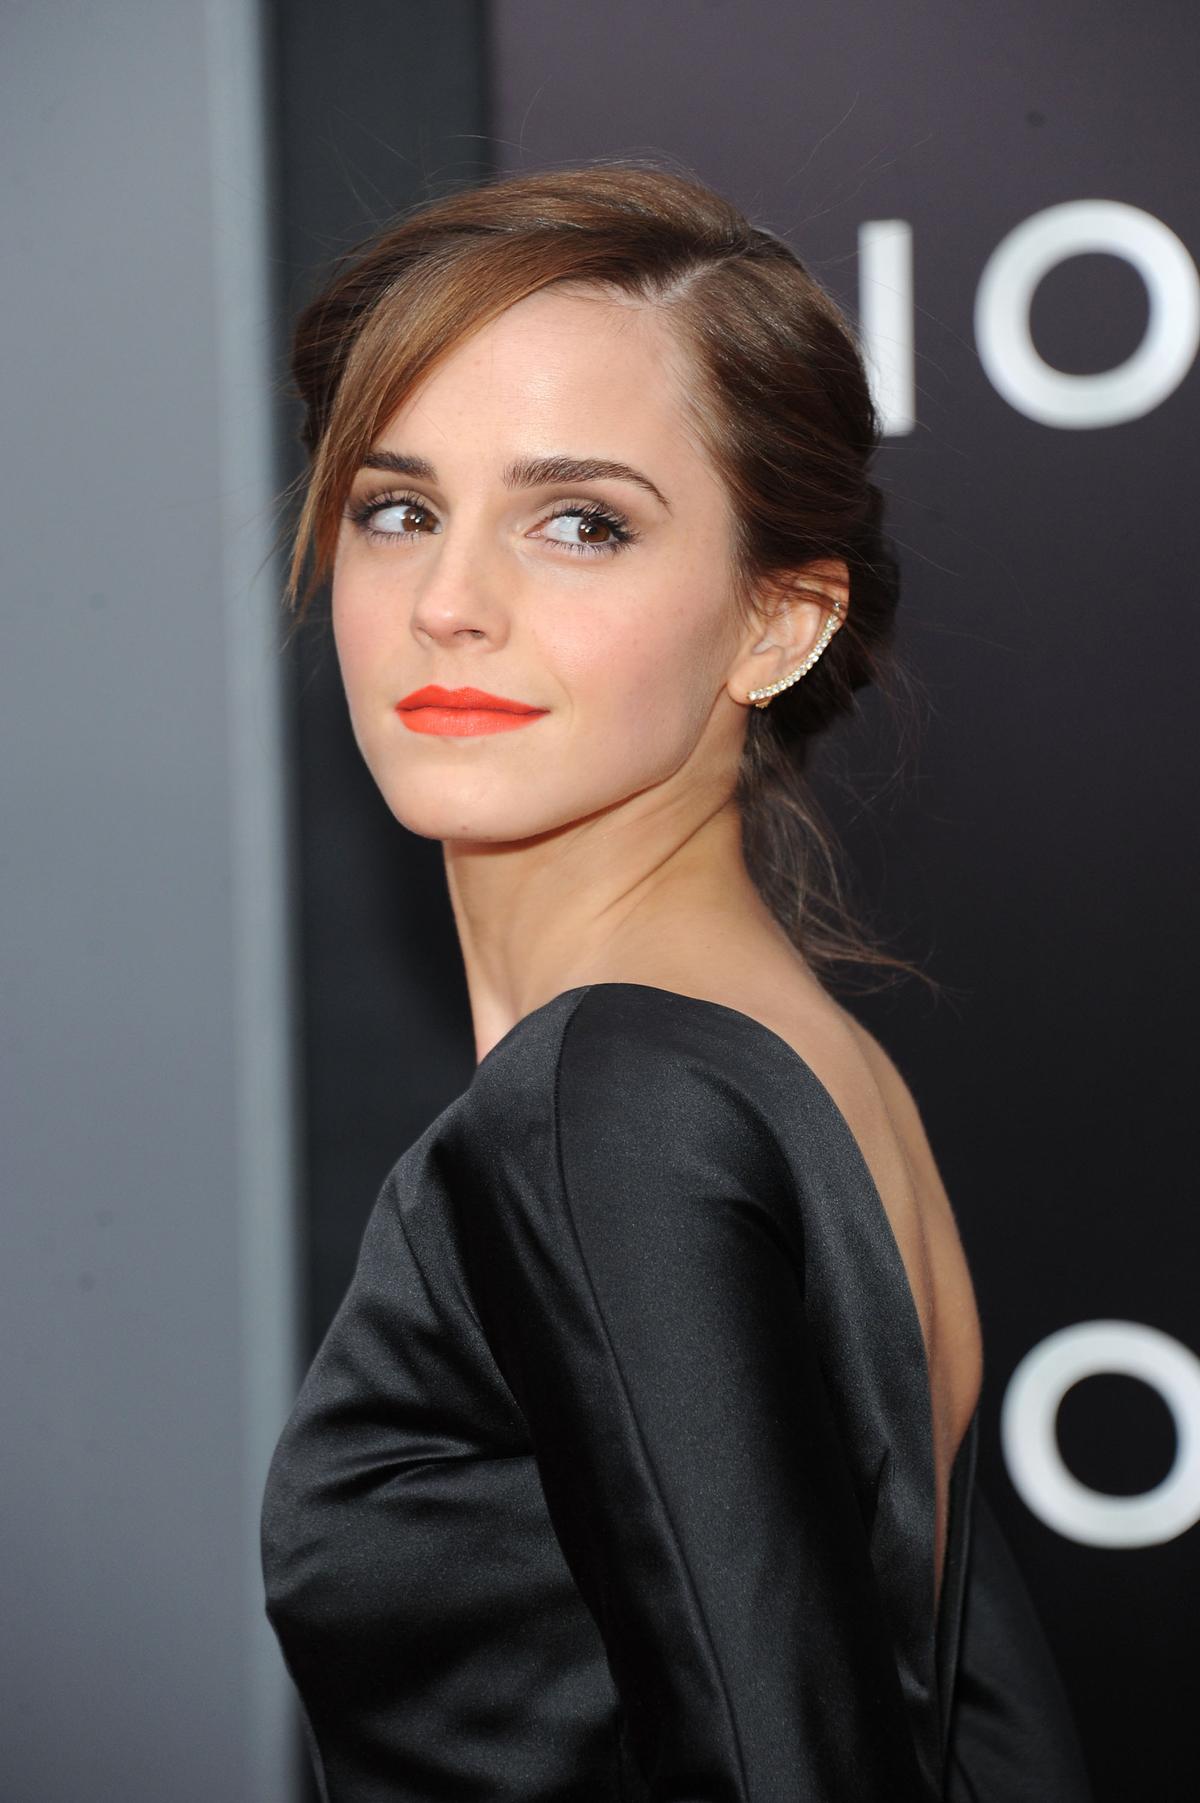 Watson at the "Noah" New York premiere at Ziegfeld Theatre on March 26, 2014 (©Getty Images | <a href="https://www.gettyimages.com.au/detail/news-photo/actress-emma-watson-attends-the-noah-new-york-premiere-at-news-photo/480744717">Jamie McCarthy</a>)